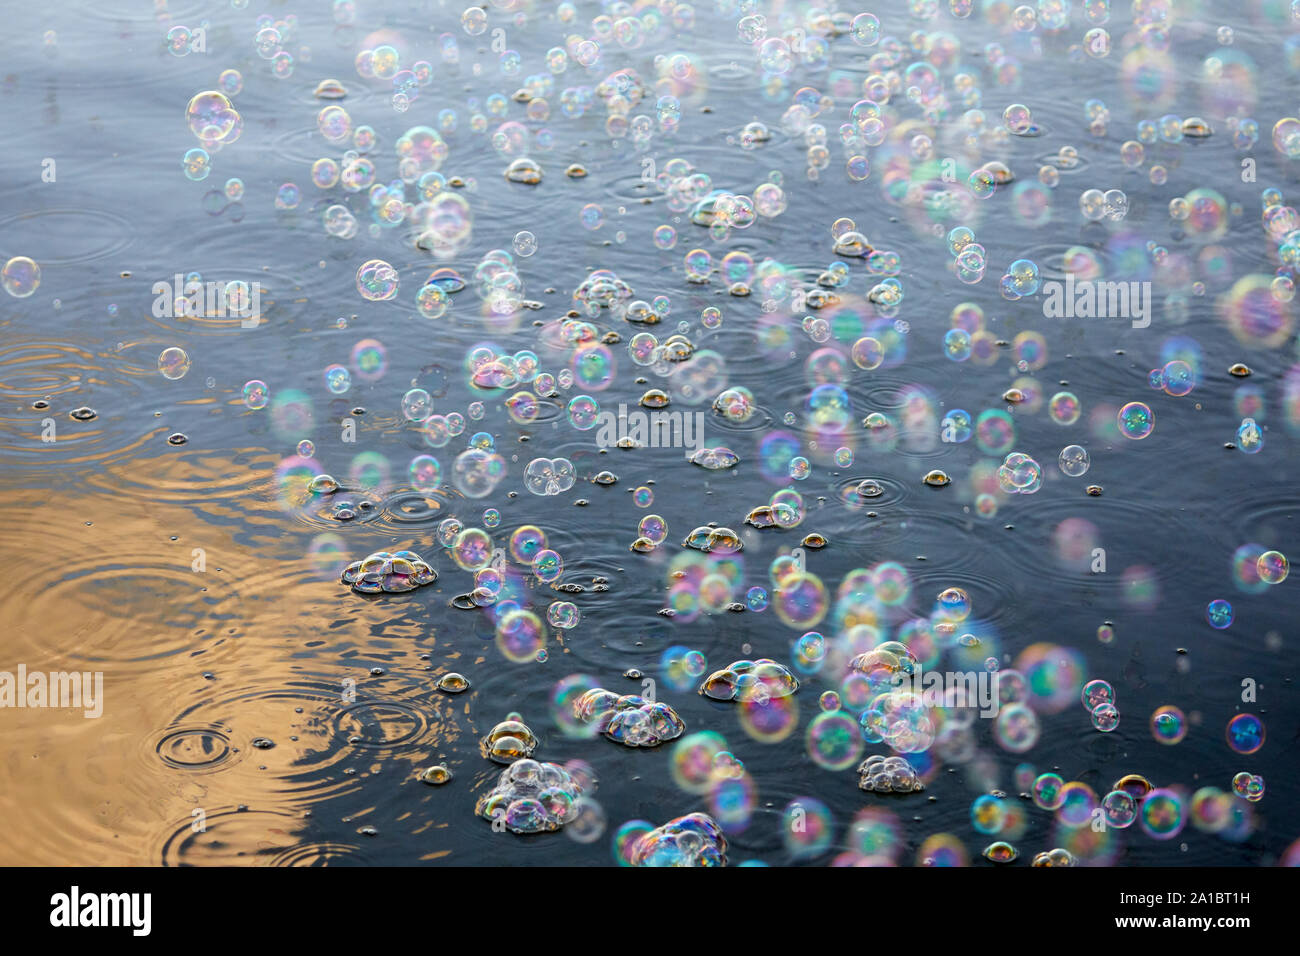 Childrens bubbles over water Stock Photo